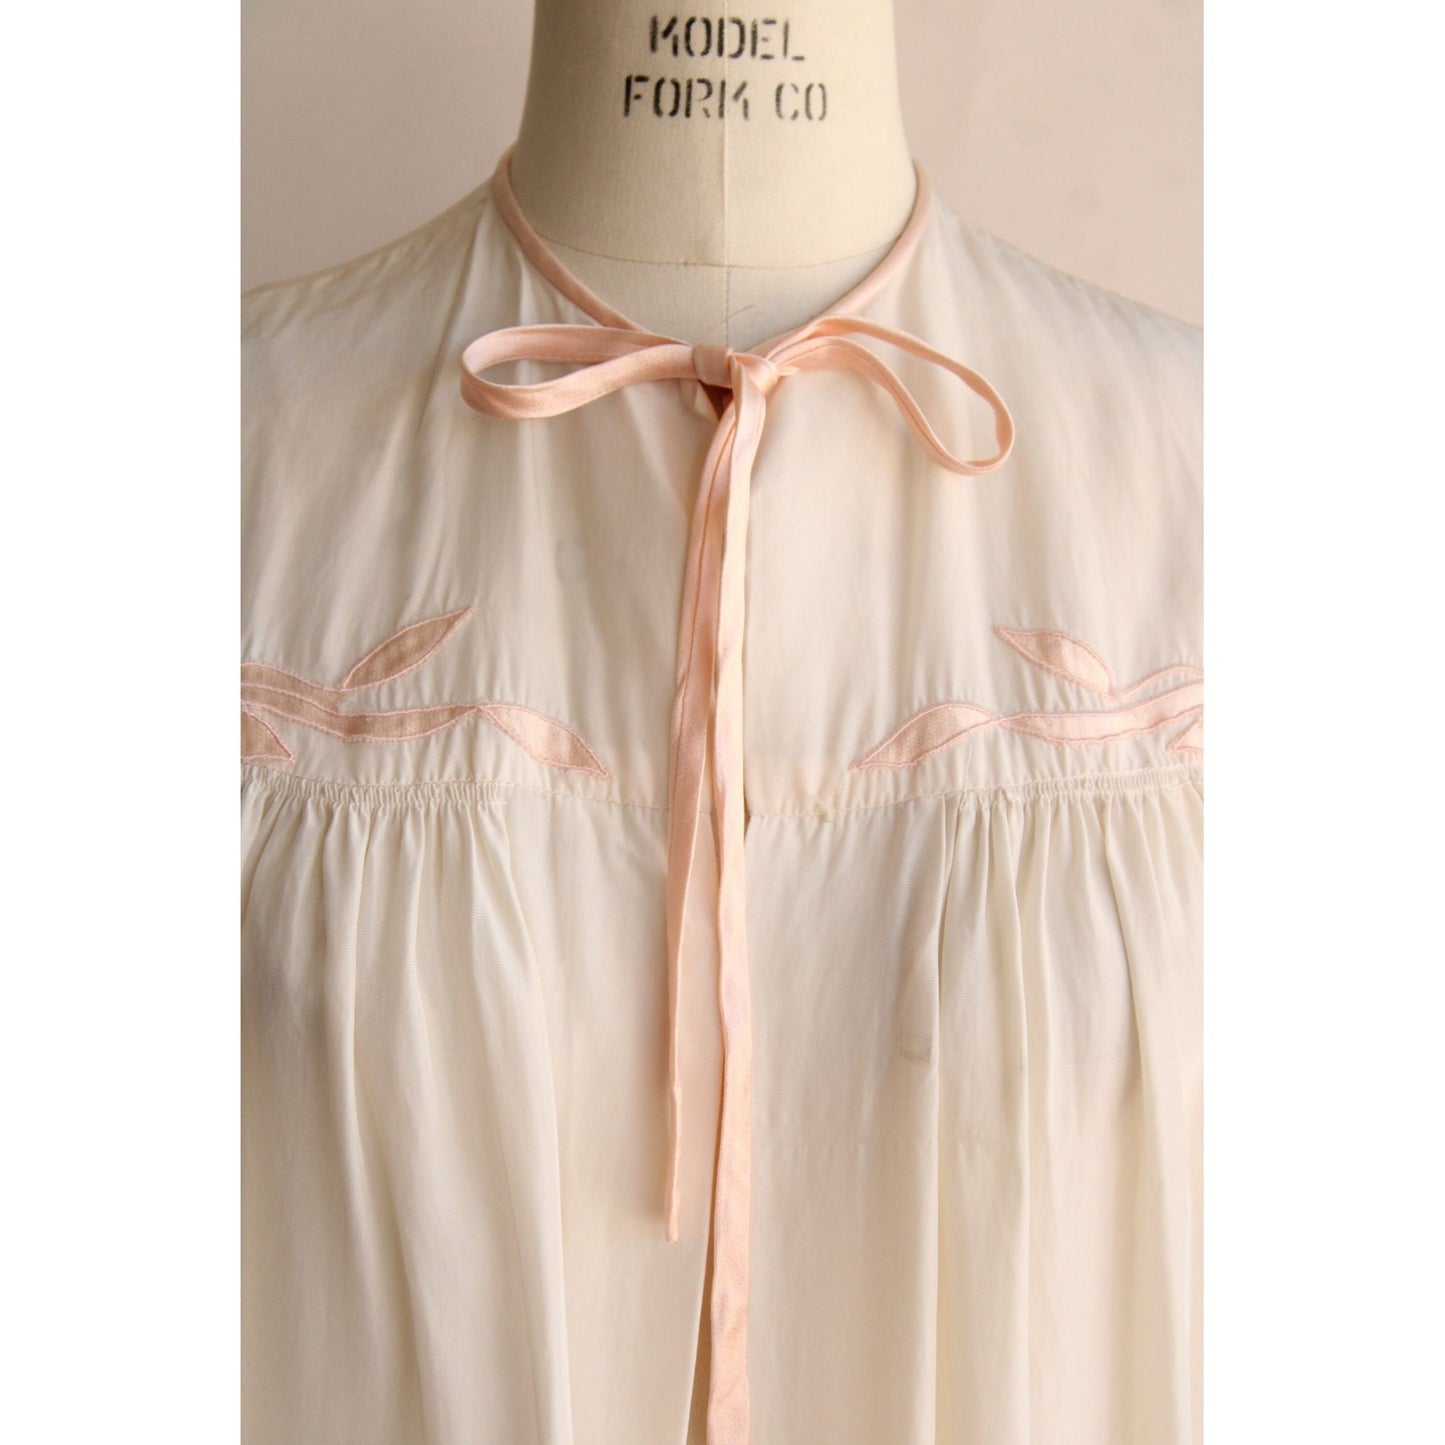 Vintage 1940s Bed Jacket in White Rayon with Pink Satin Trim